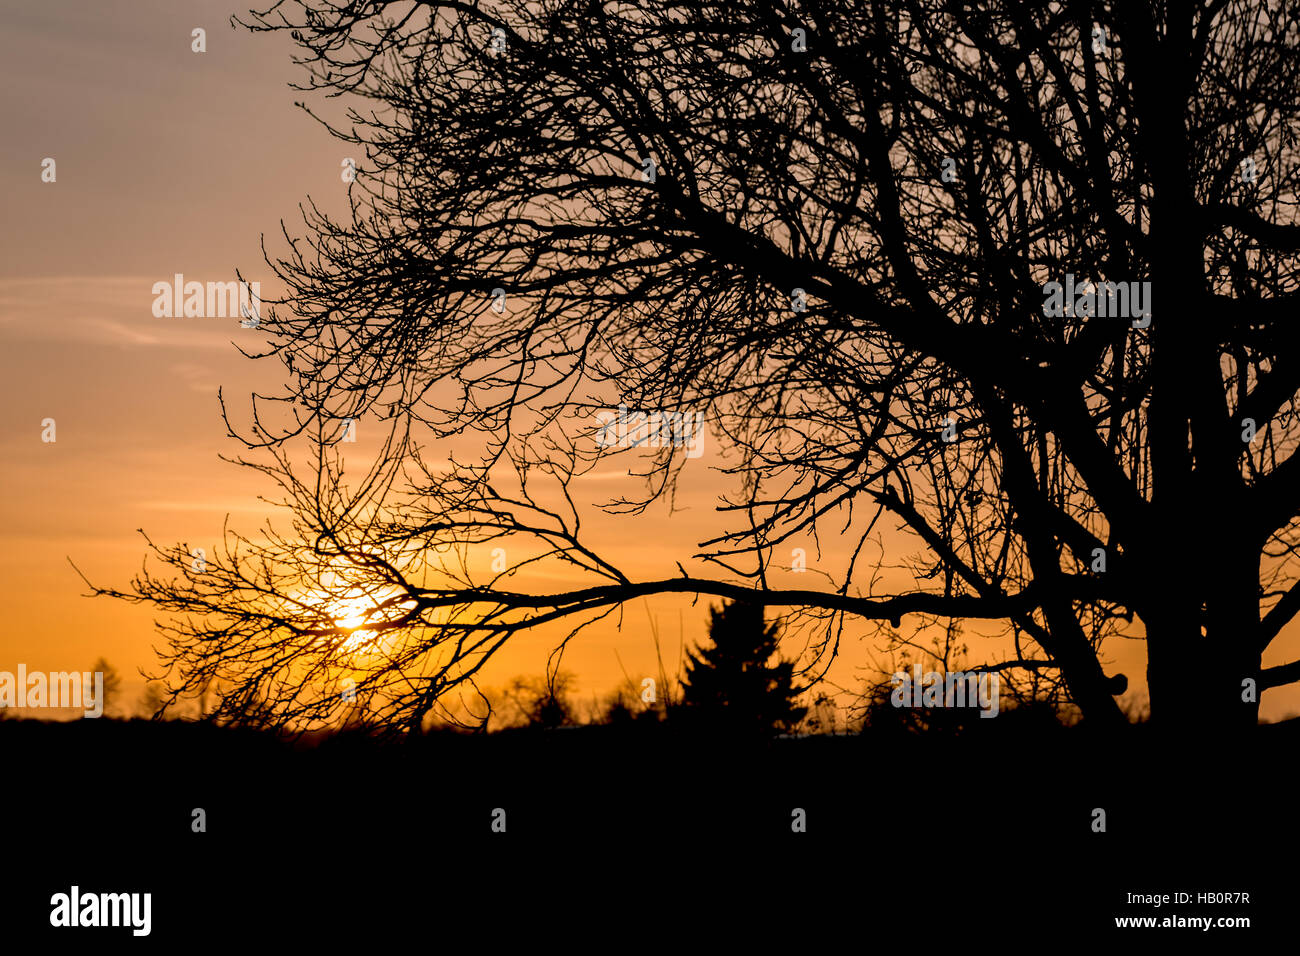 Thin branches in front of warm sunset Stock Photo